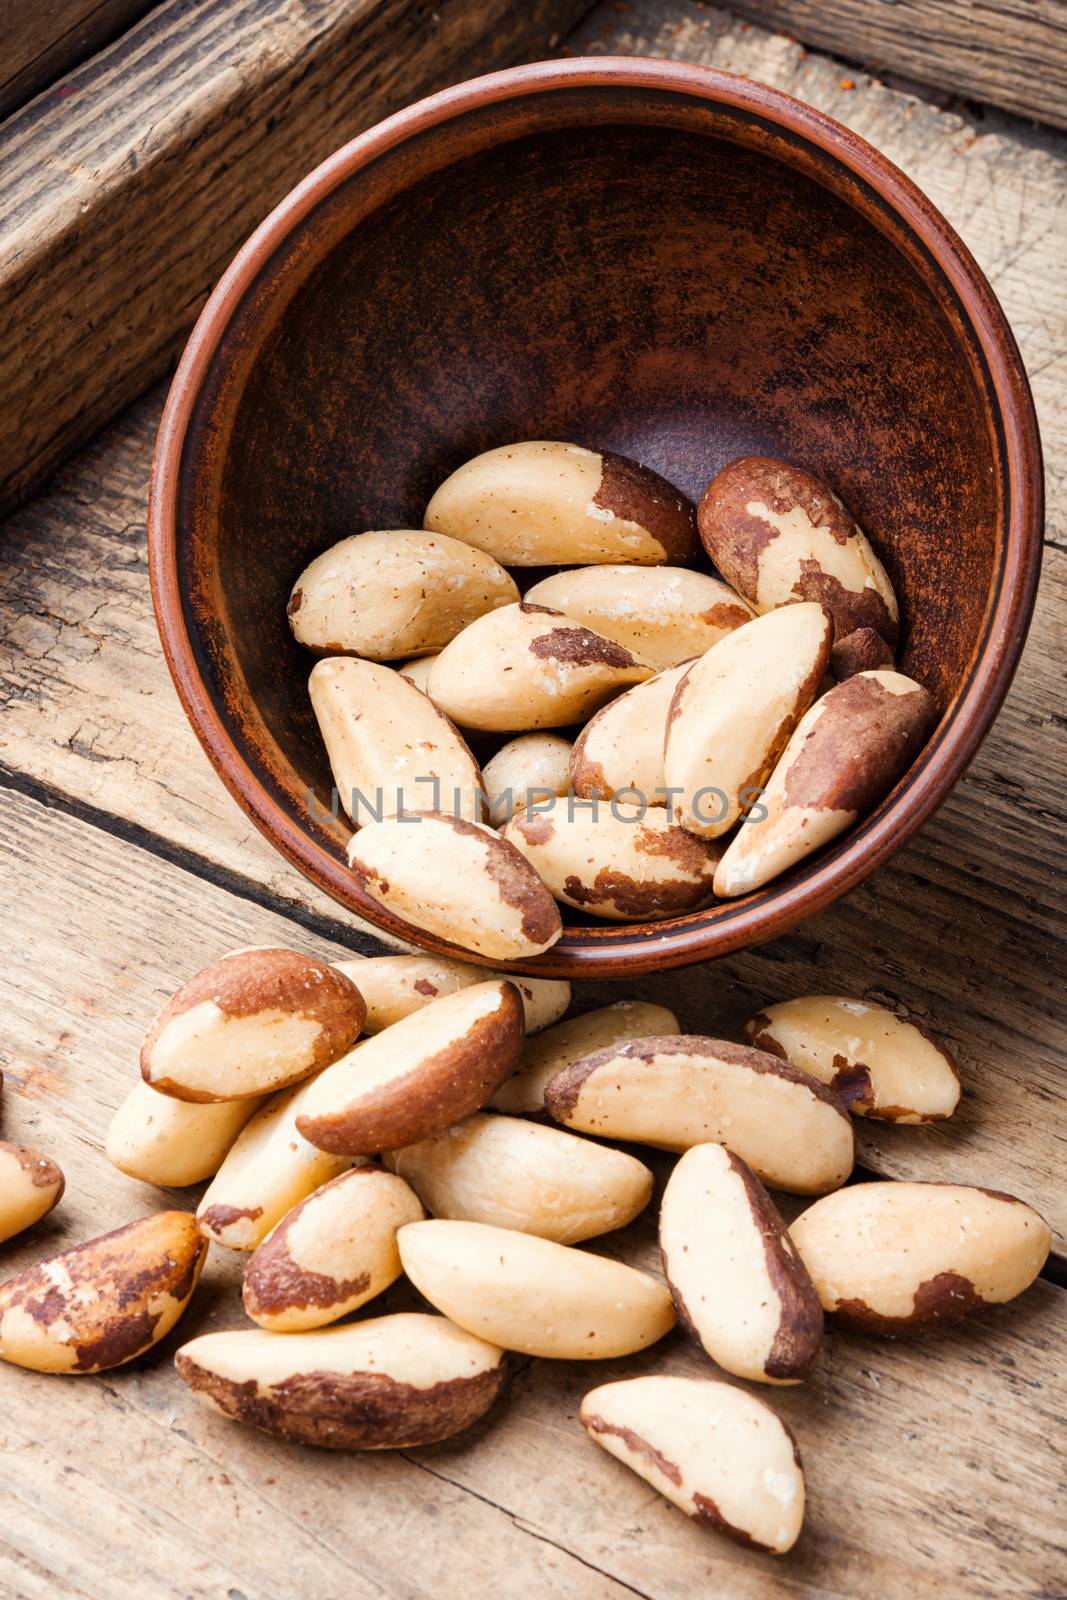 Tasty peeled brazil nut in bowl on old wooden table